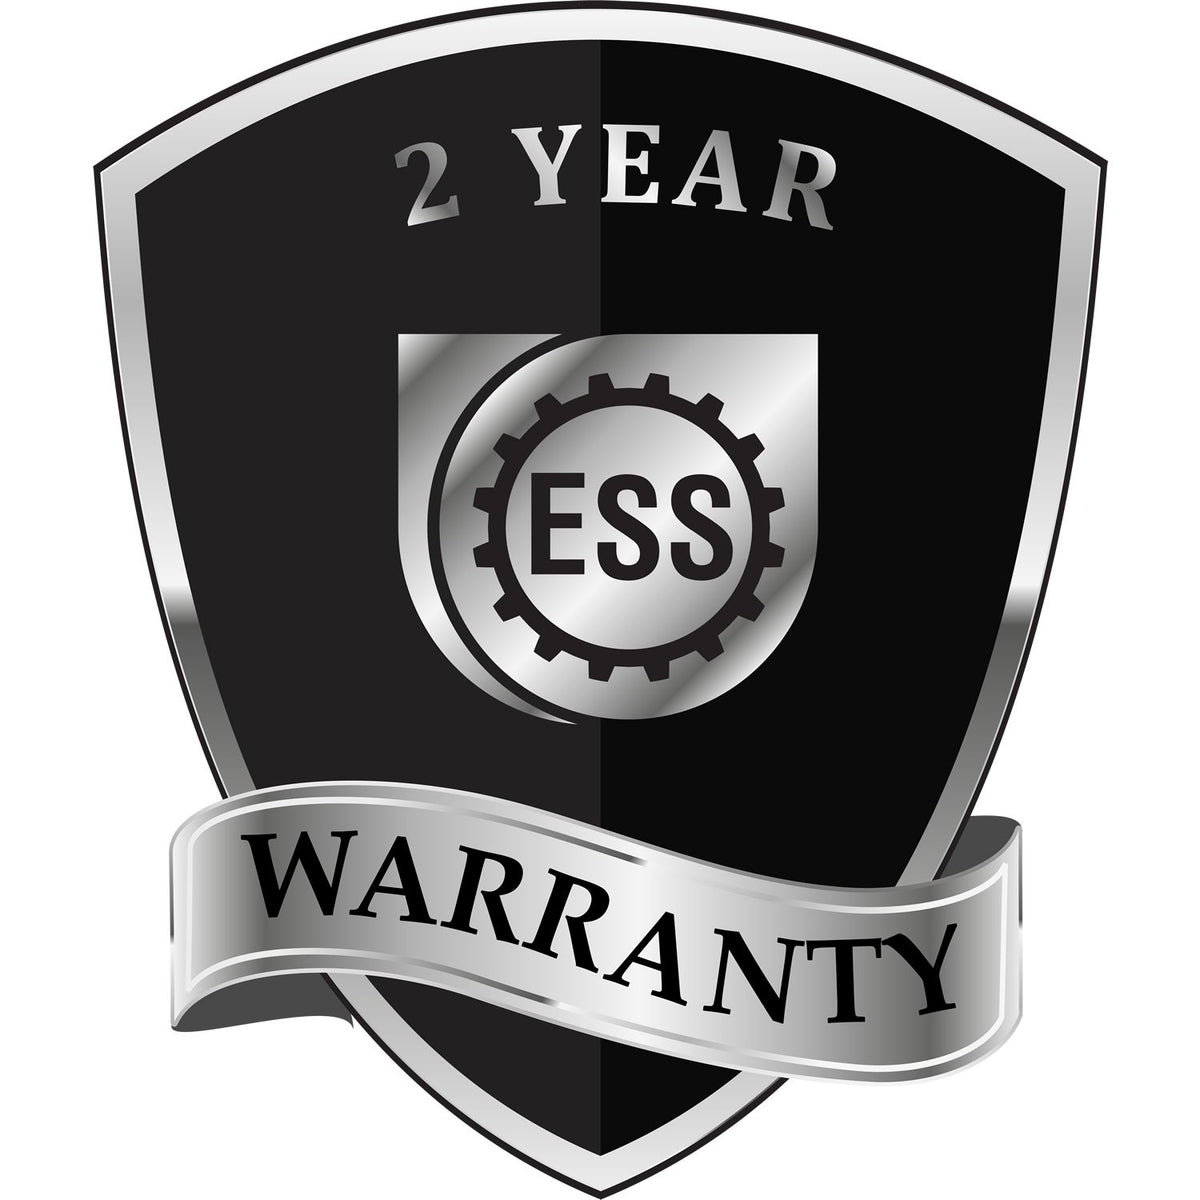 A badge or emblem showing a warranty icon for the Heavy Duty Cast Iron New Hampshire Architect Embosser